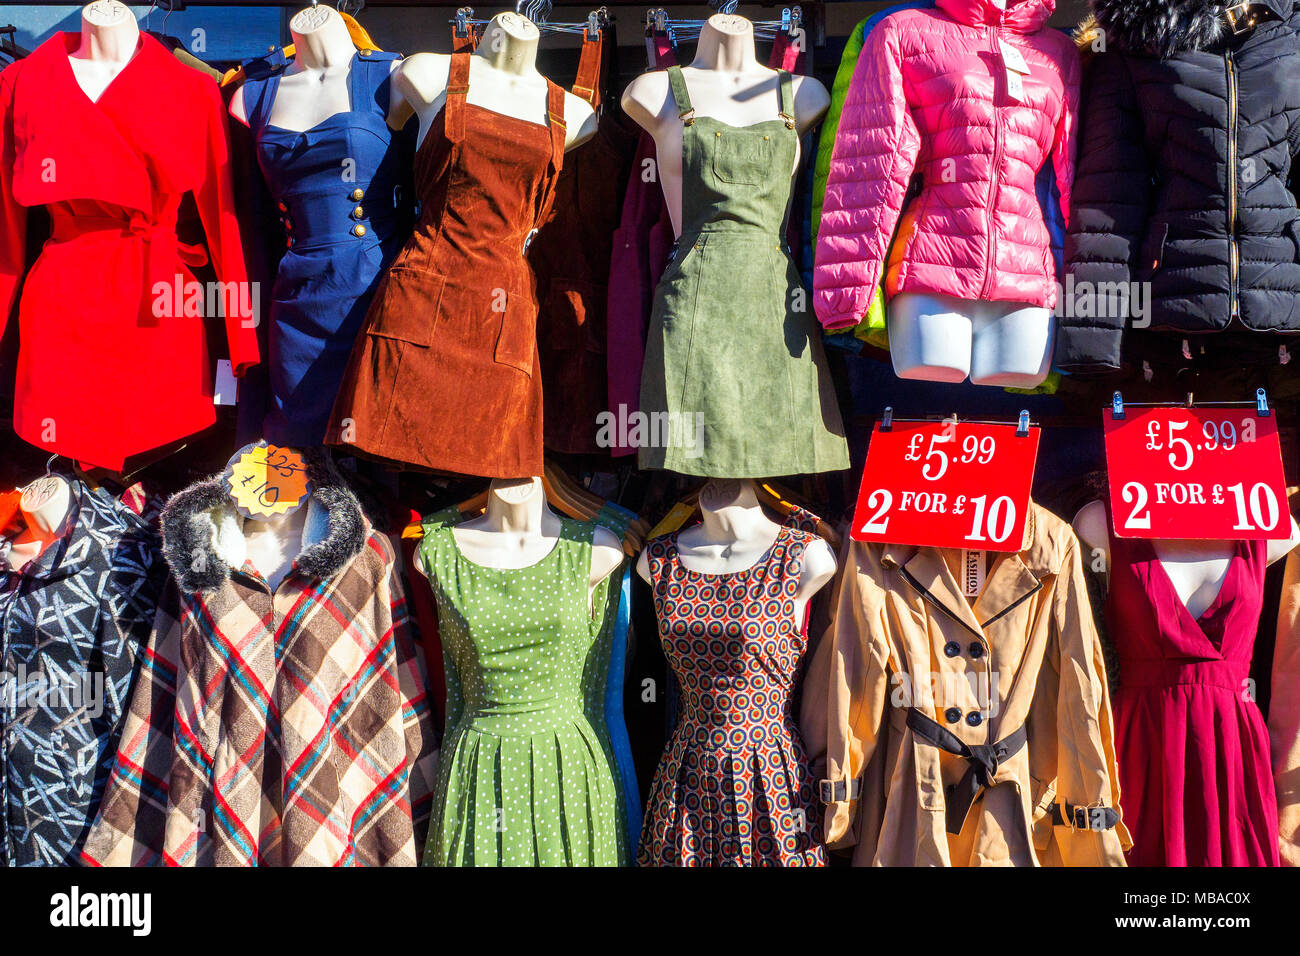 Clothes for sale at Camden Market - London, England Stock Photo